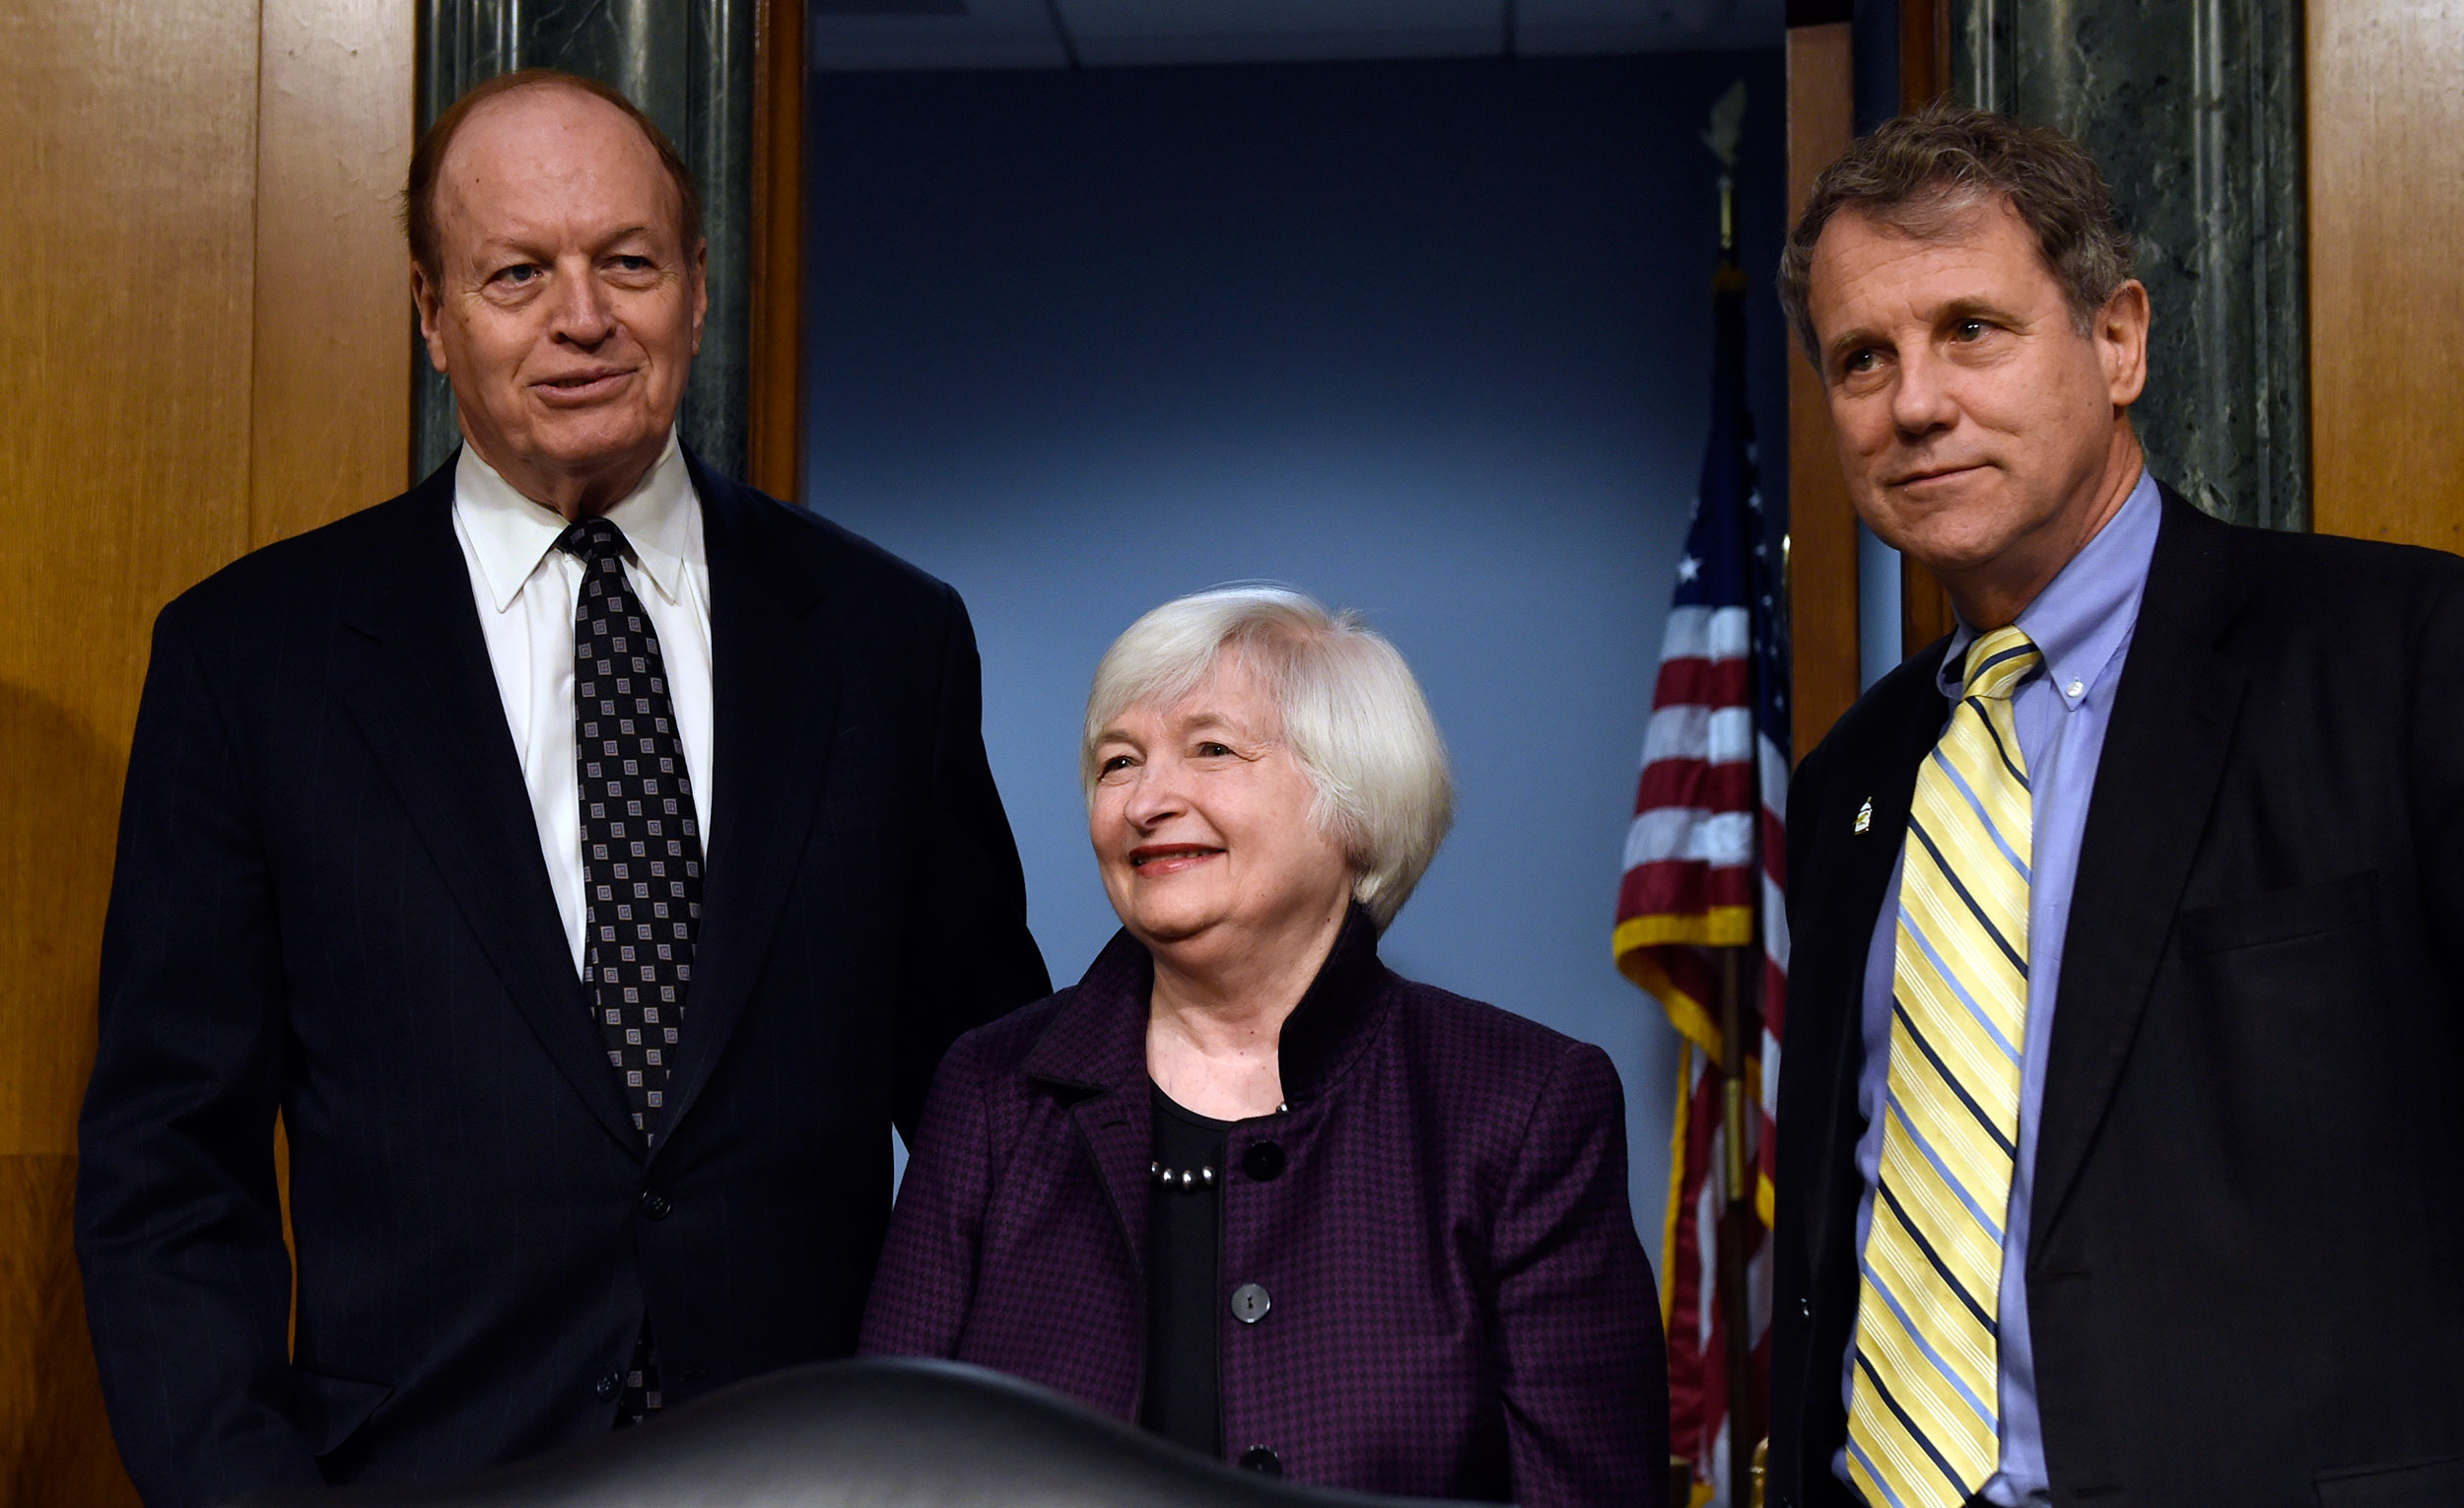 Senate Banking Committee Chairman Sen. Richard Shelby, R-Ala., left, and the committee's ranking member Sen. Sherrod Brown, D-Ohio, right, with Federal Reserve Board Chair Janet Yellen on Capitol Hill in Washington, on Feb. 24, 2015.
